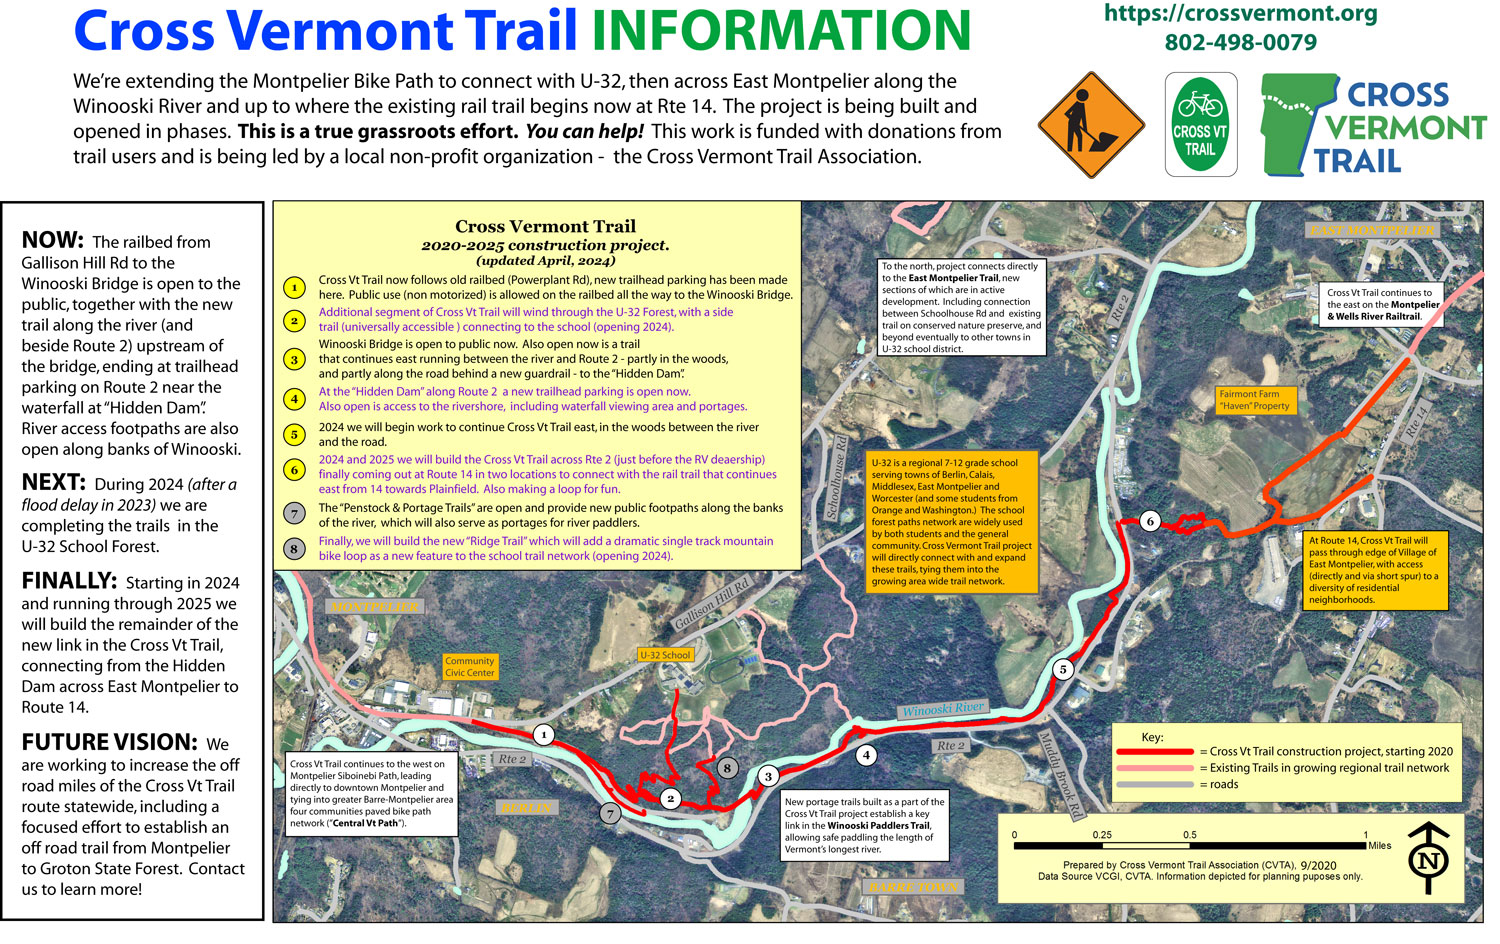 map of Winooski Bridge project trail phases